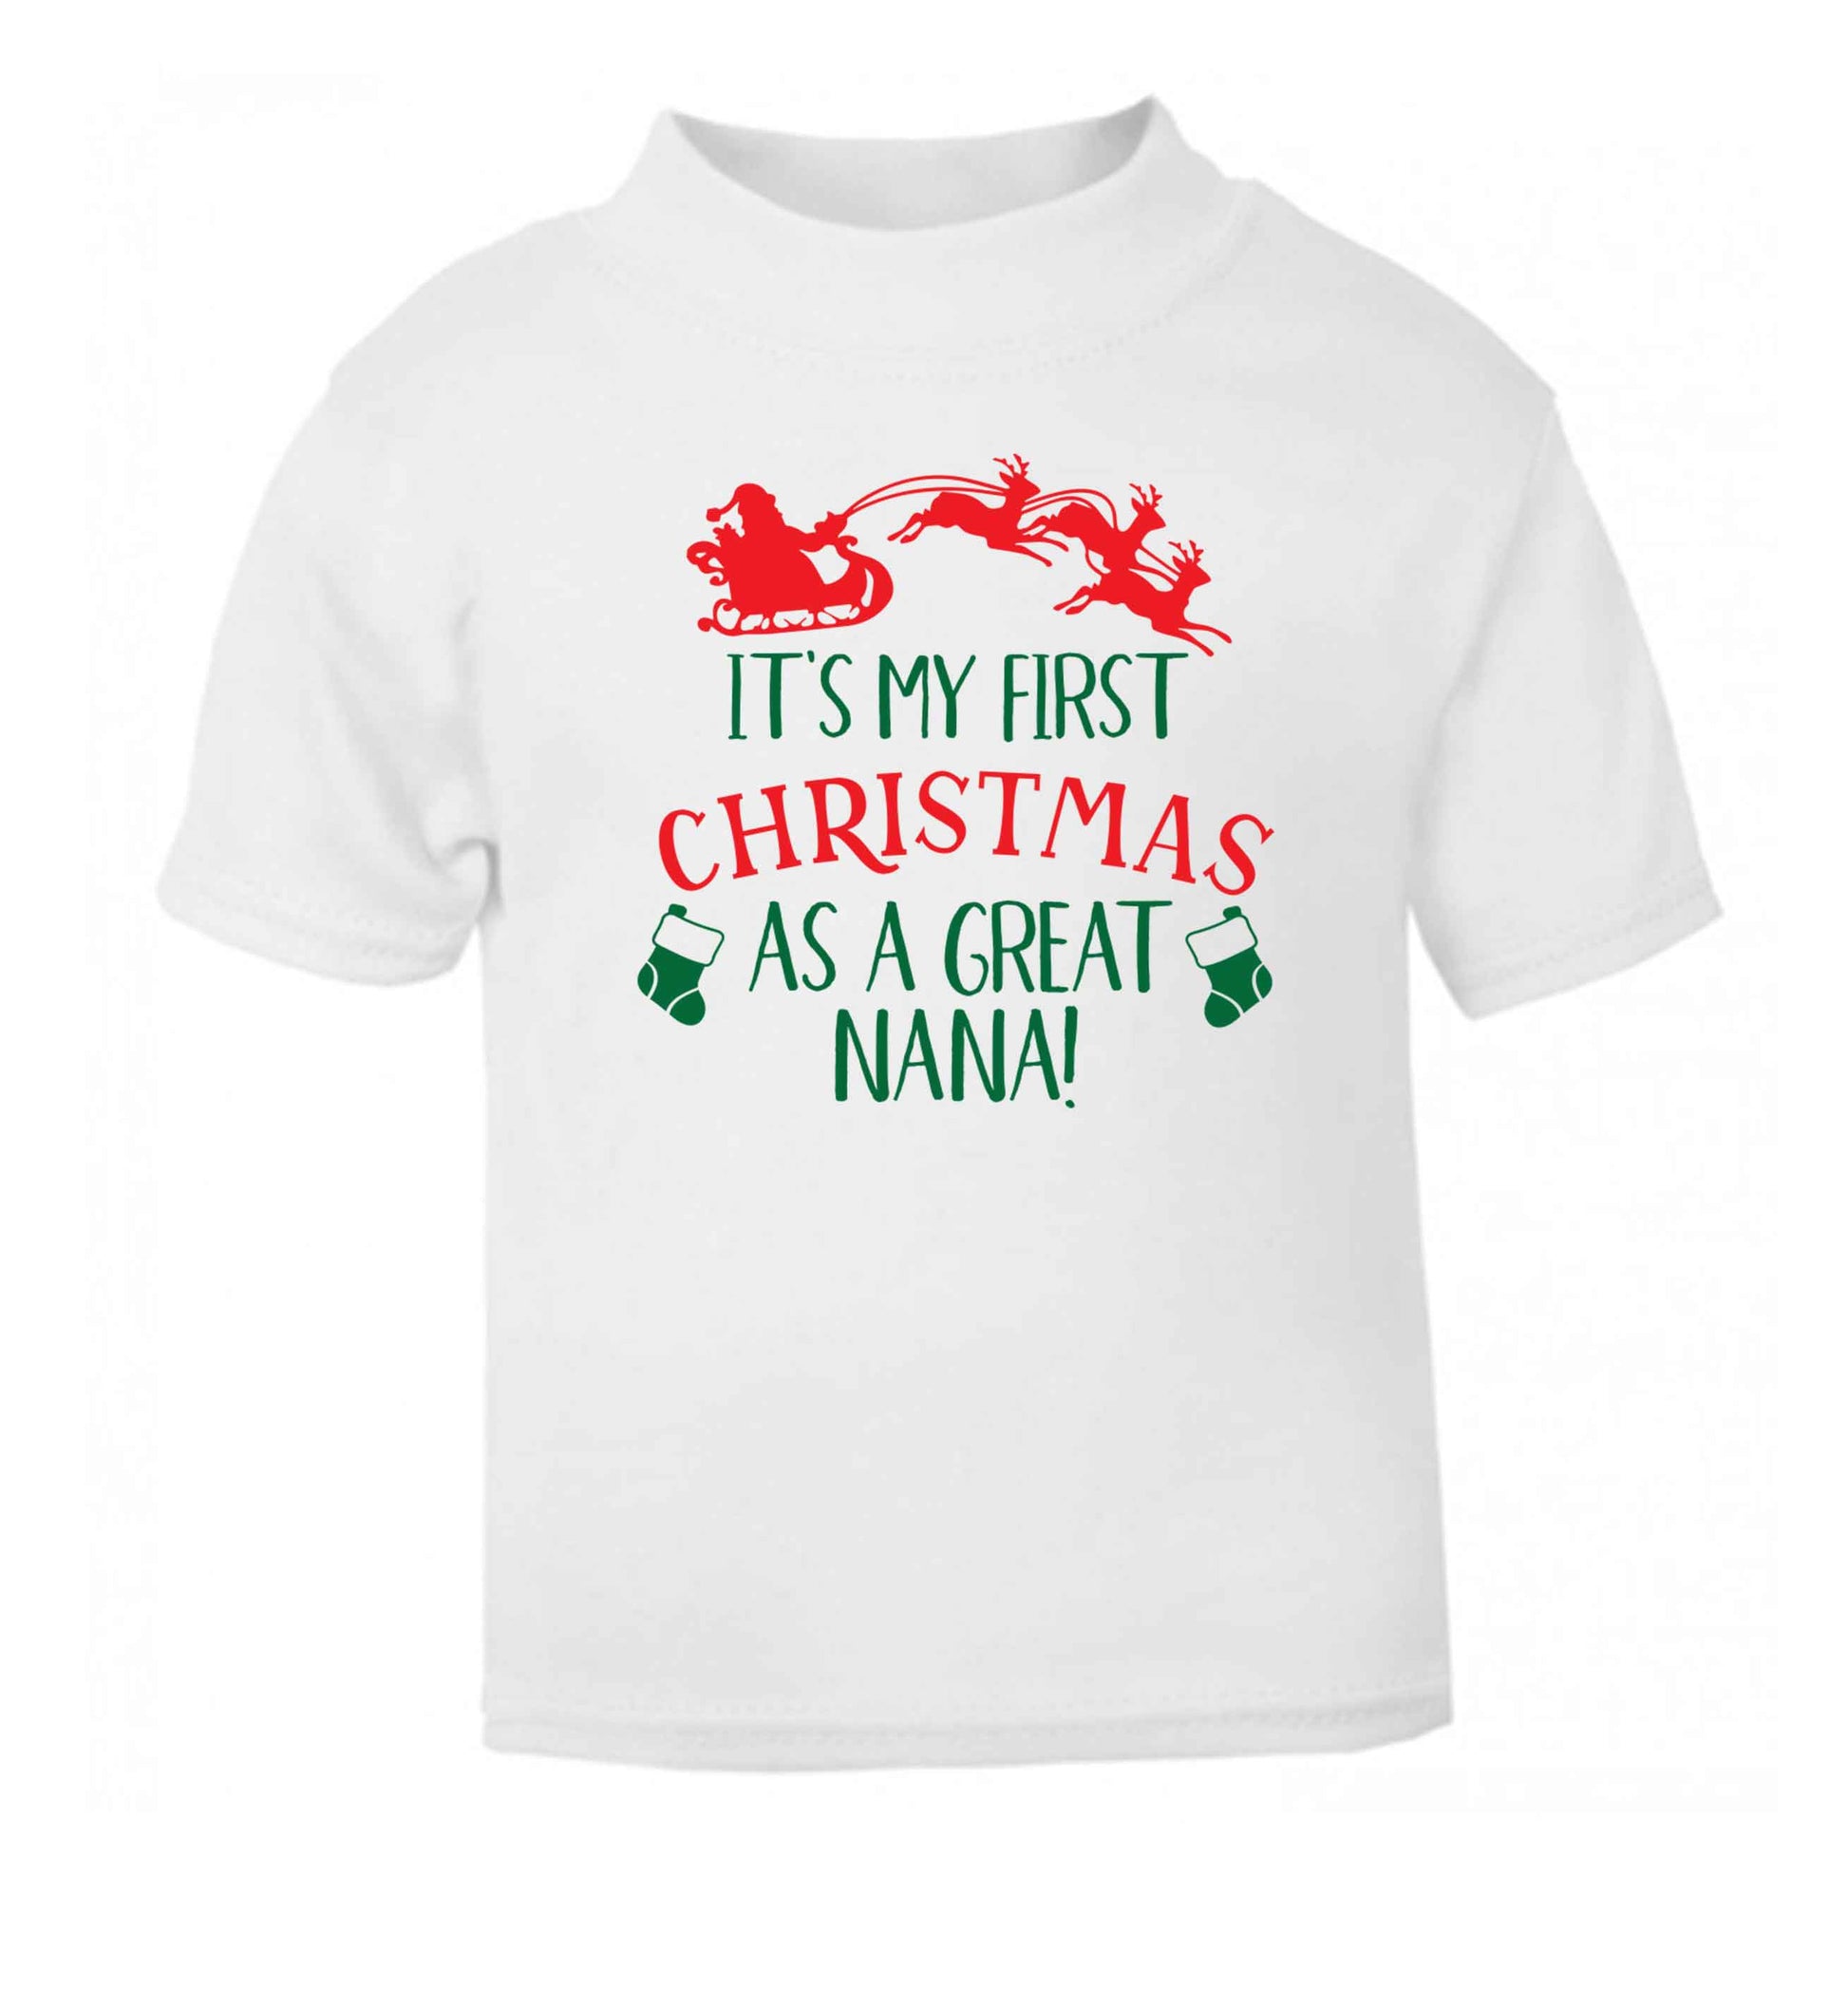 It's my first Christmas as a great nana! white Baby Toddler Tshirt 2 Years